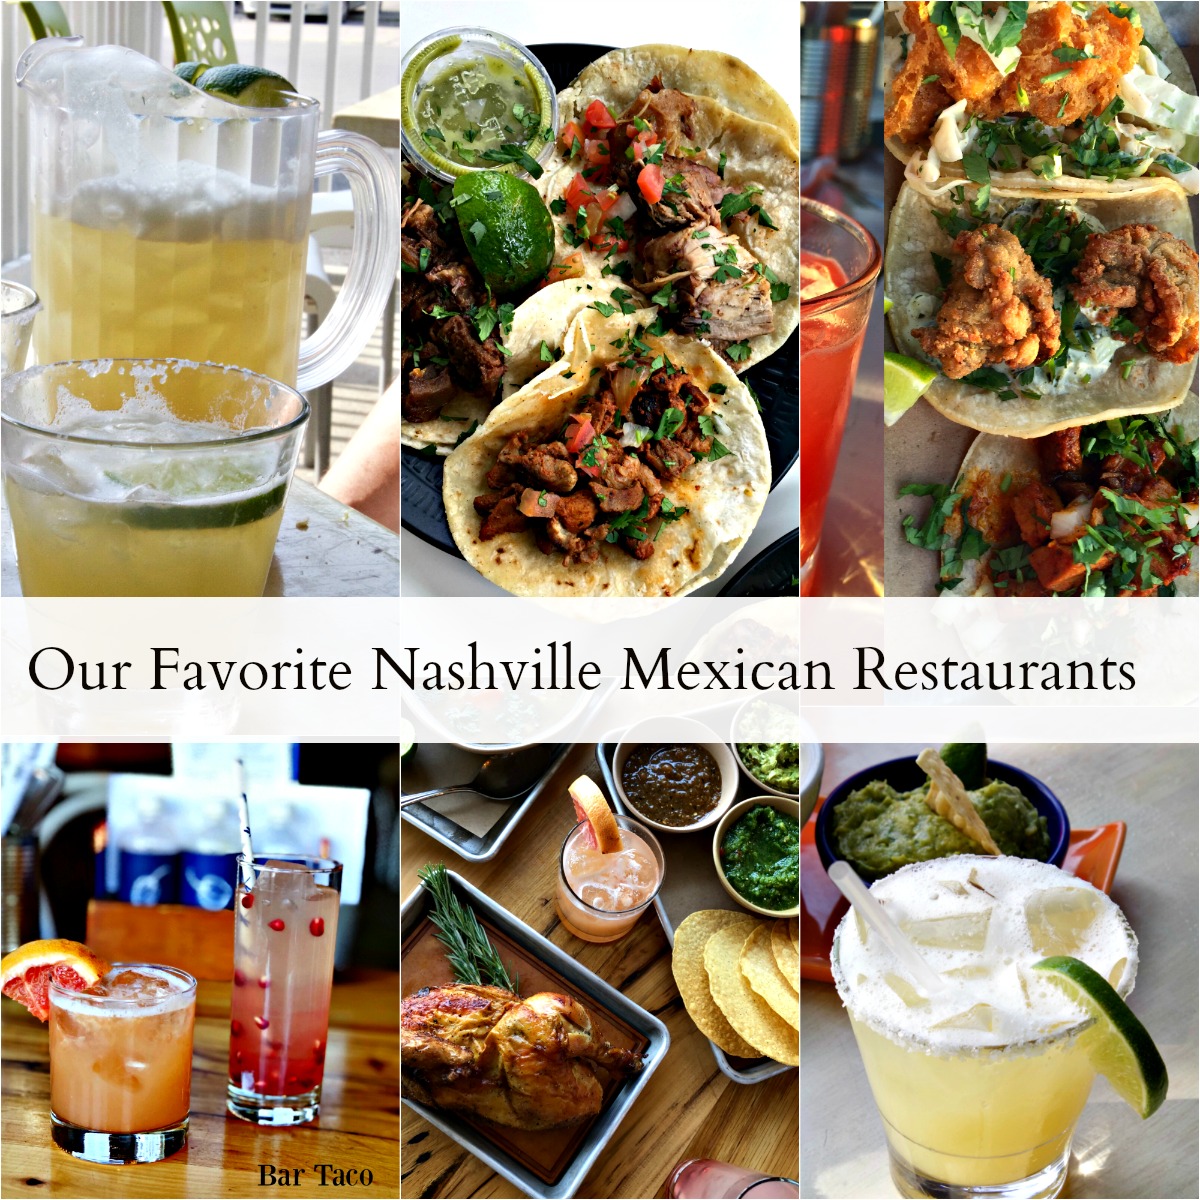 Our Favorite Mexican Restaurants in Nashville from Spinach Tiger